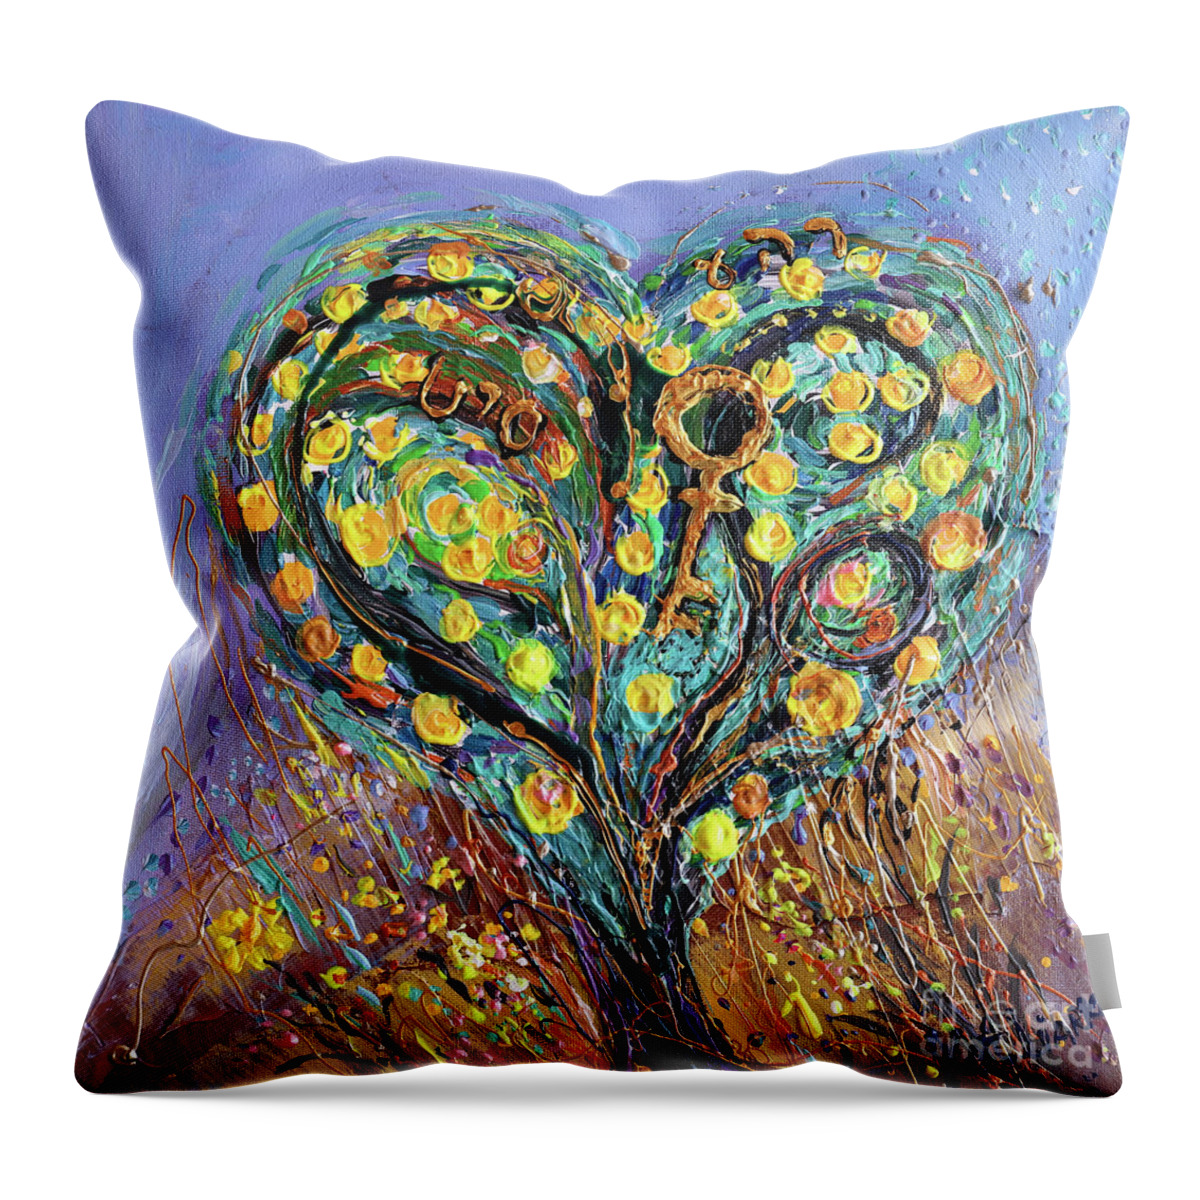 Angel Throw Pillow featuring the painting Pardes #4 by Elena Kotliarker